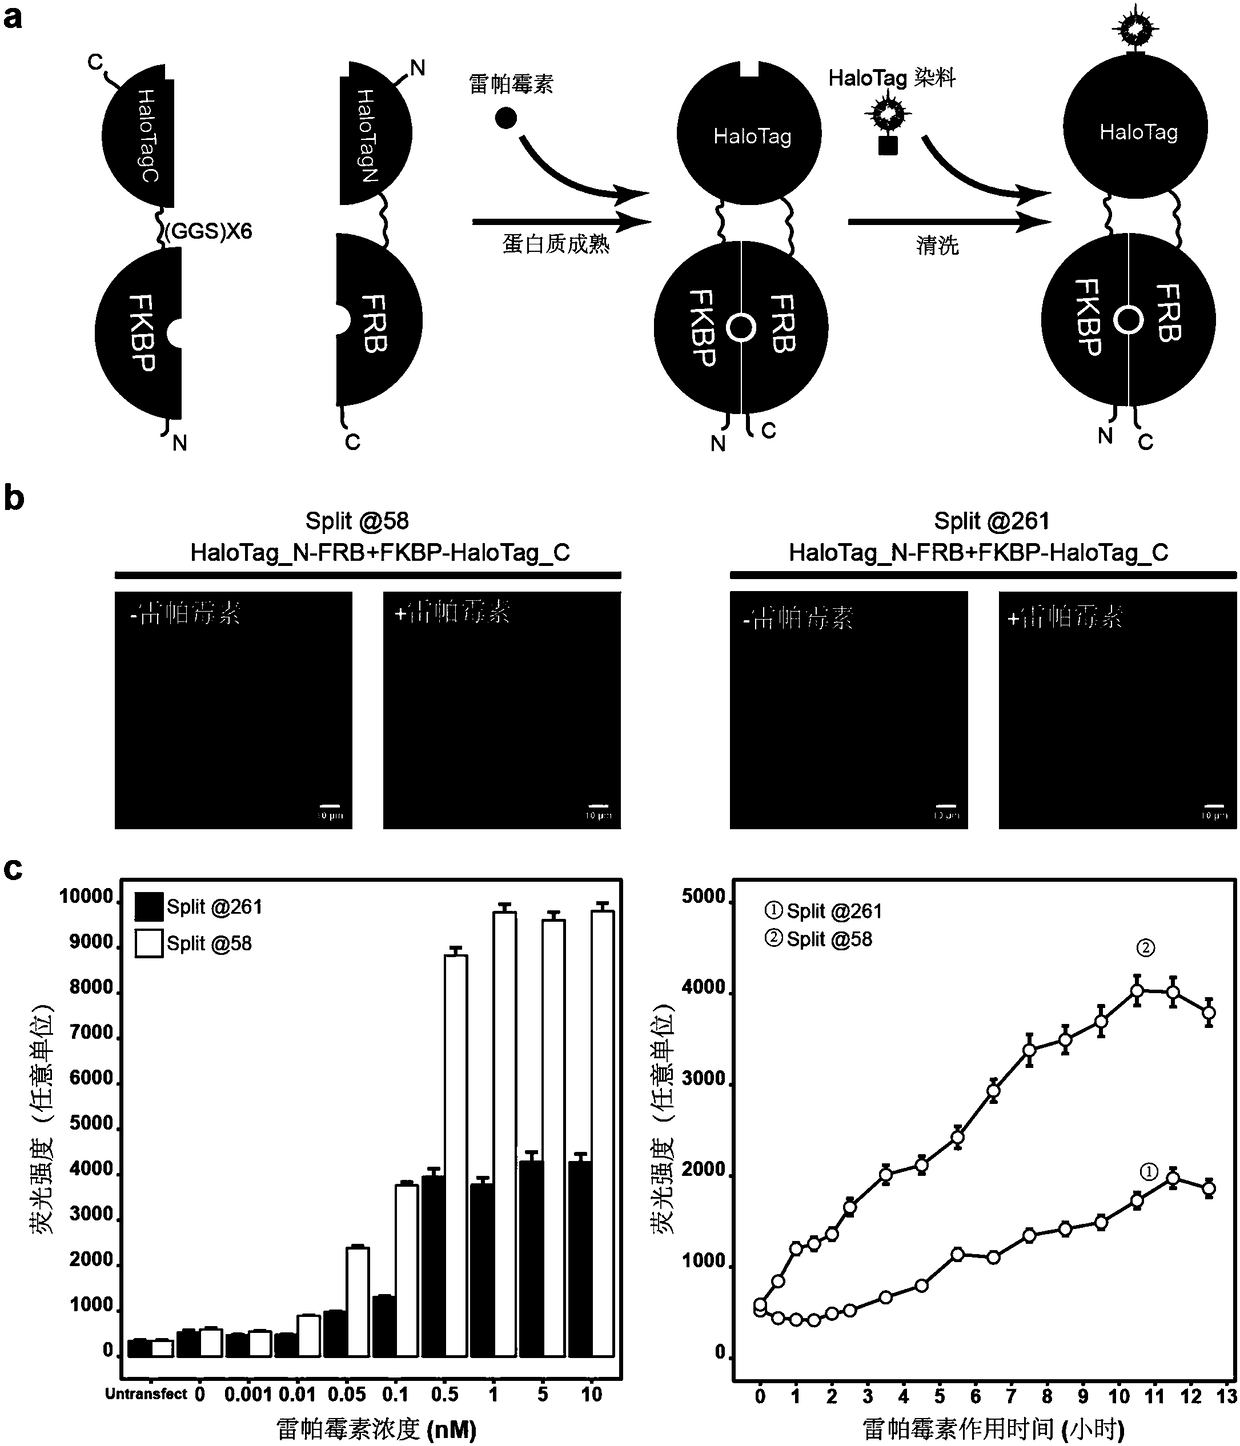 Imaging and tracking of interaction between proteins in living cells by utilizing bimolecular fluorescence complementation technology based on self-linkage label